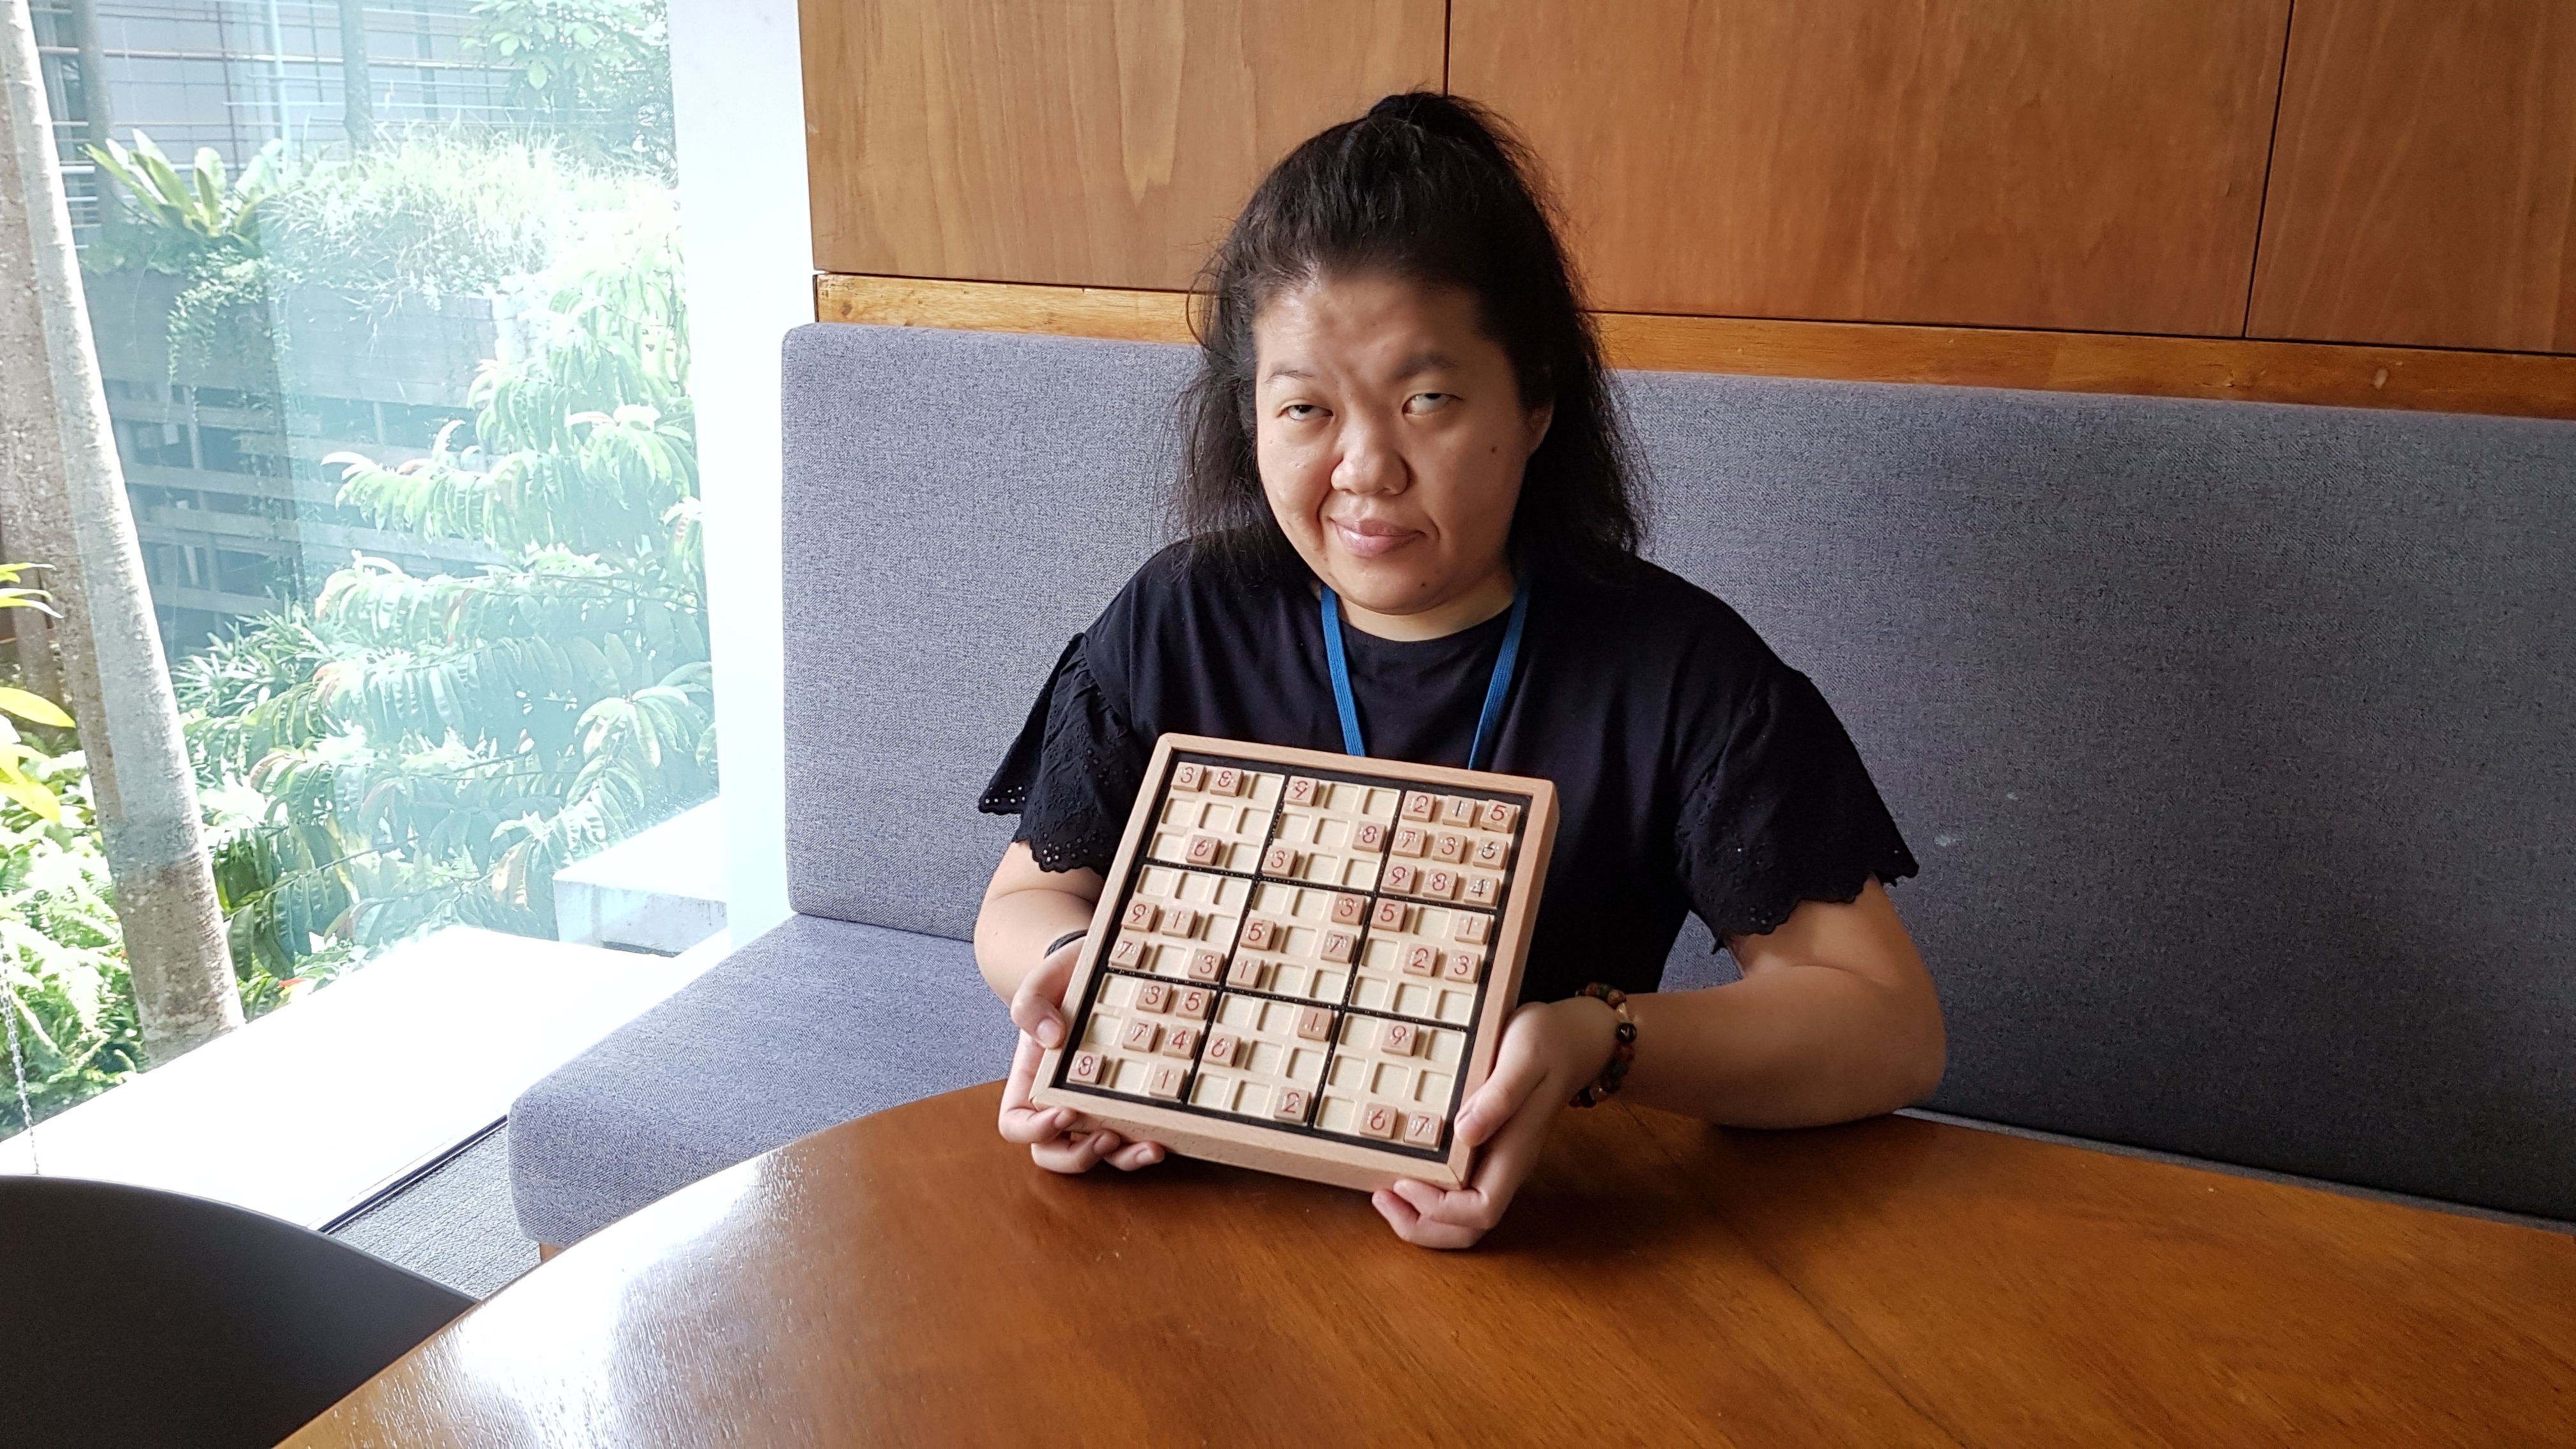 Siew Ling posing with her adapted Sudoku set.